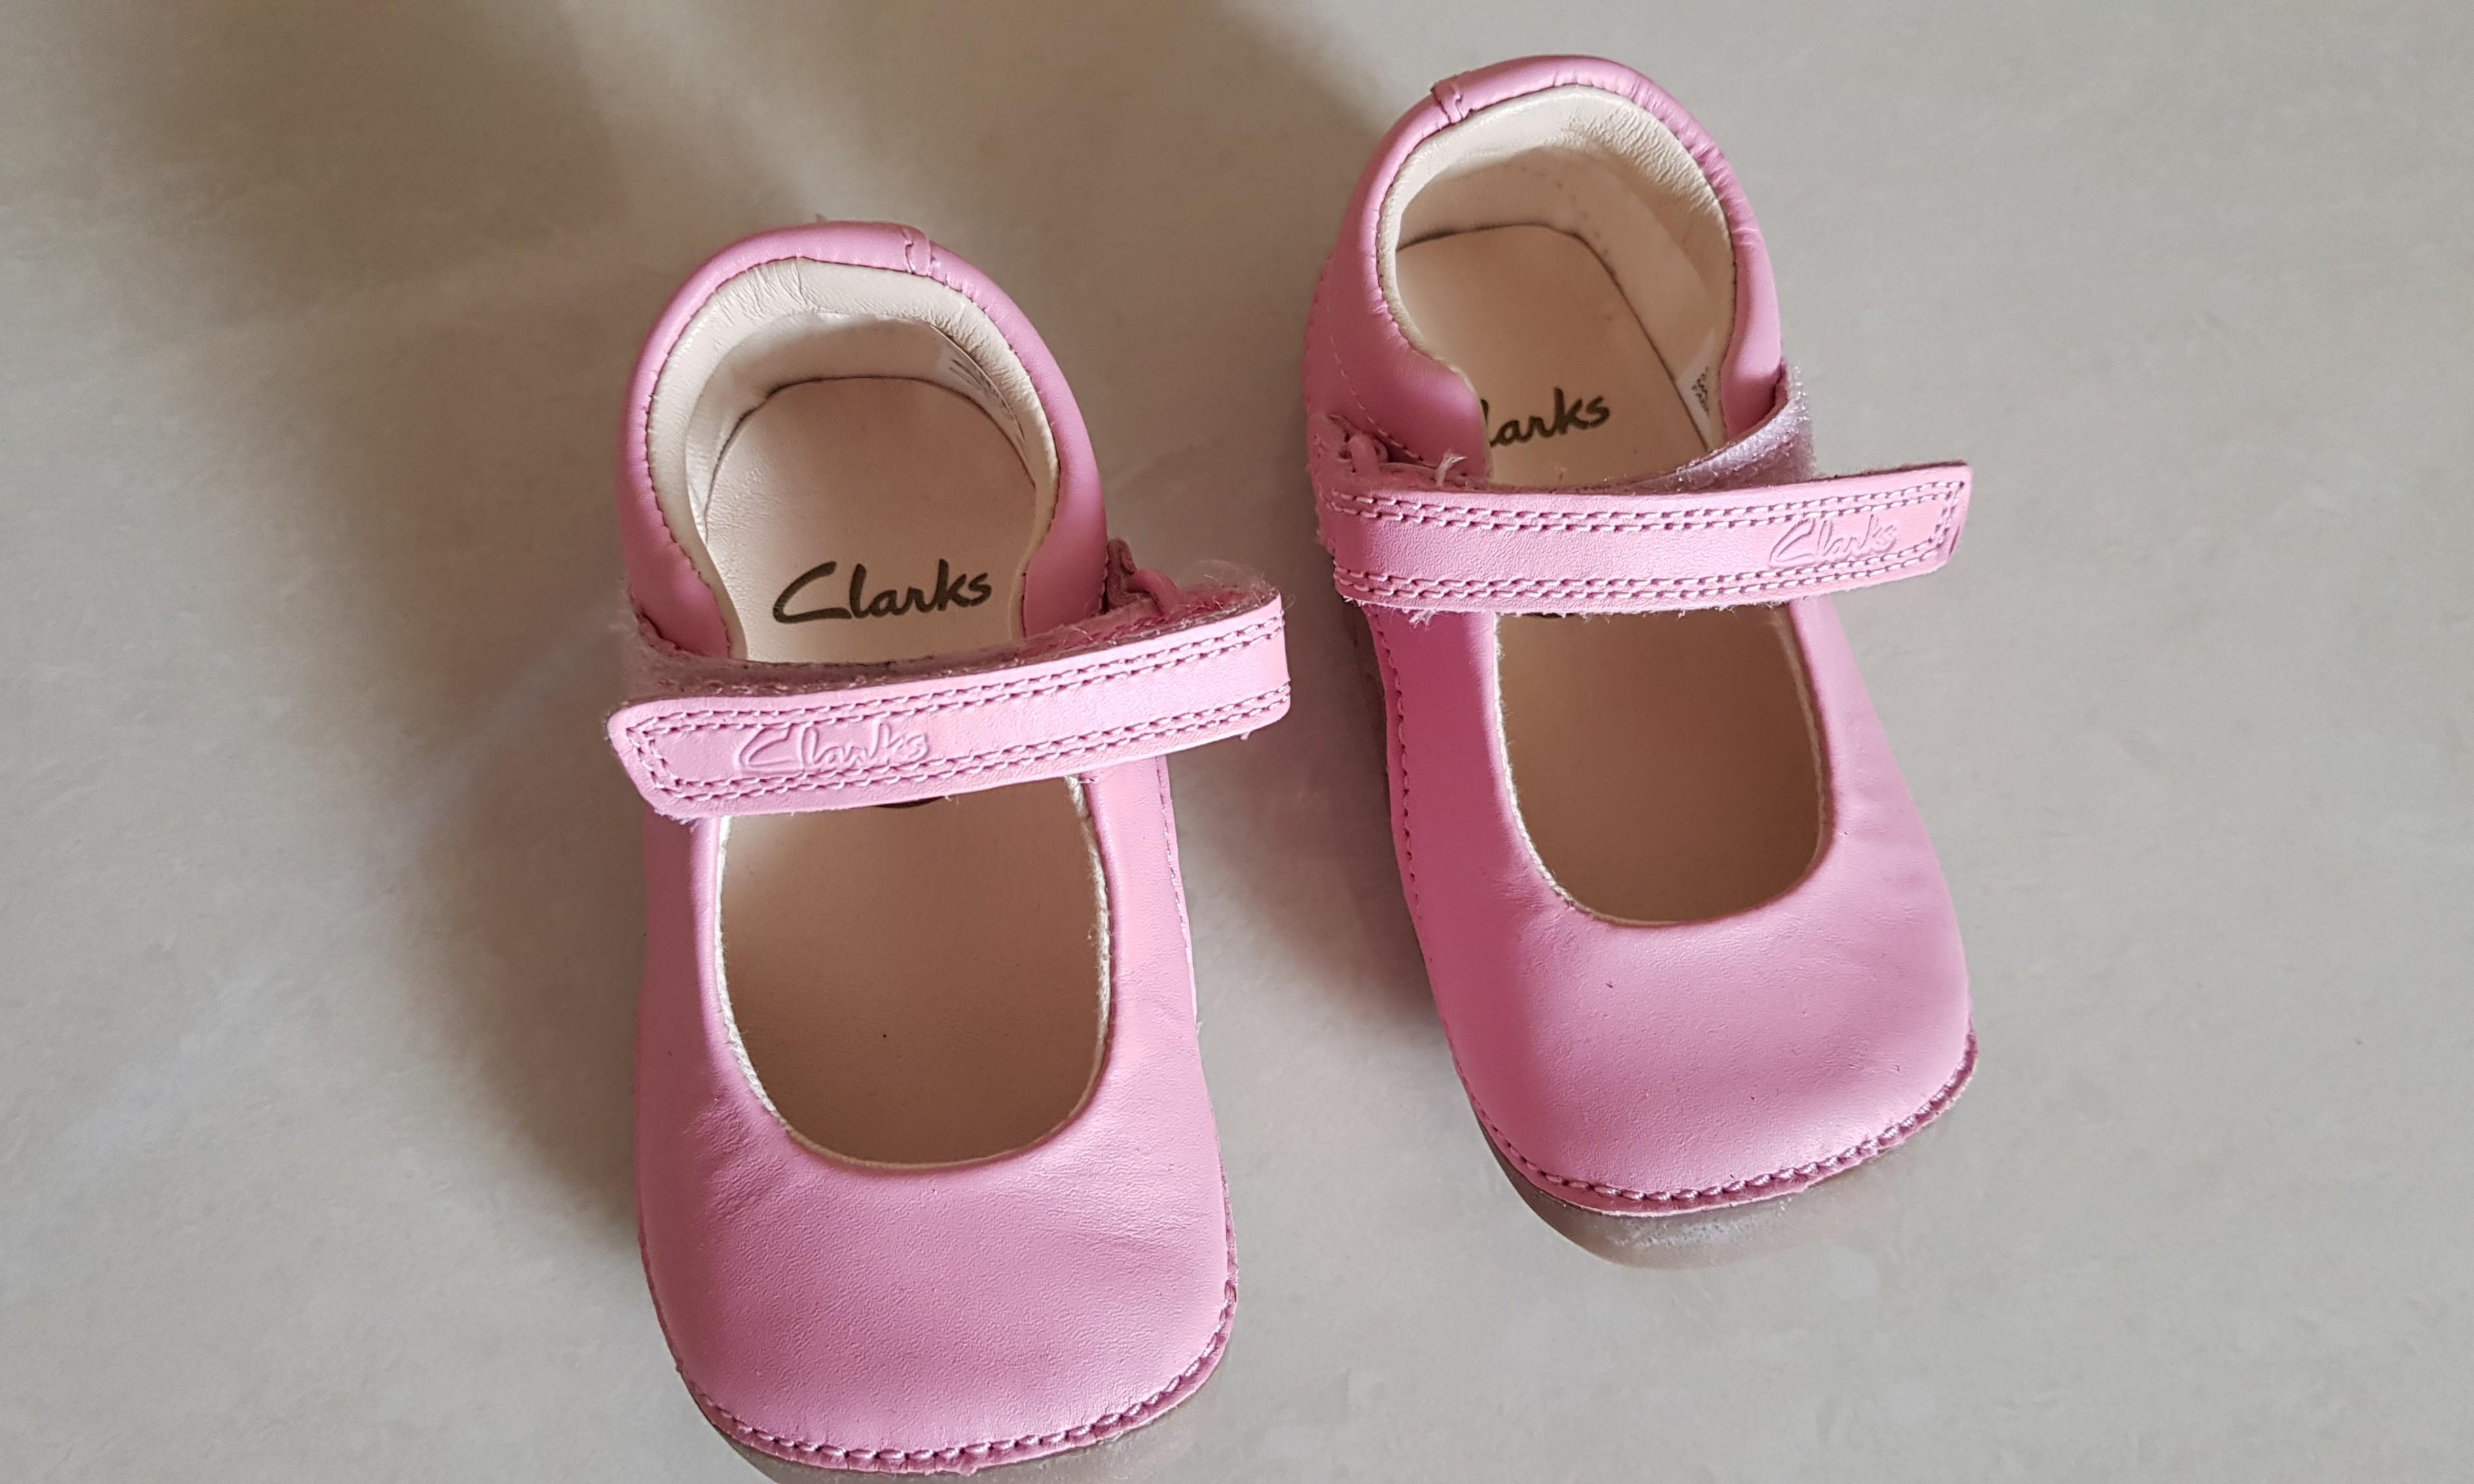 clarks shoes toddler